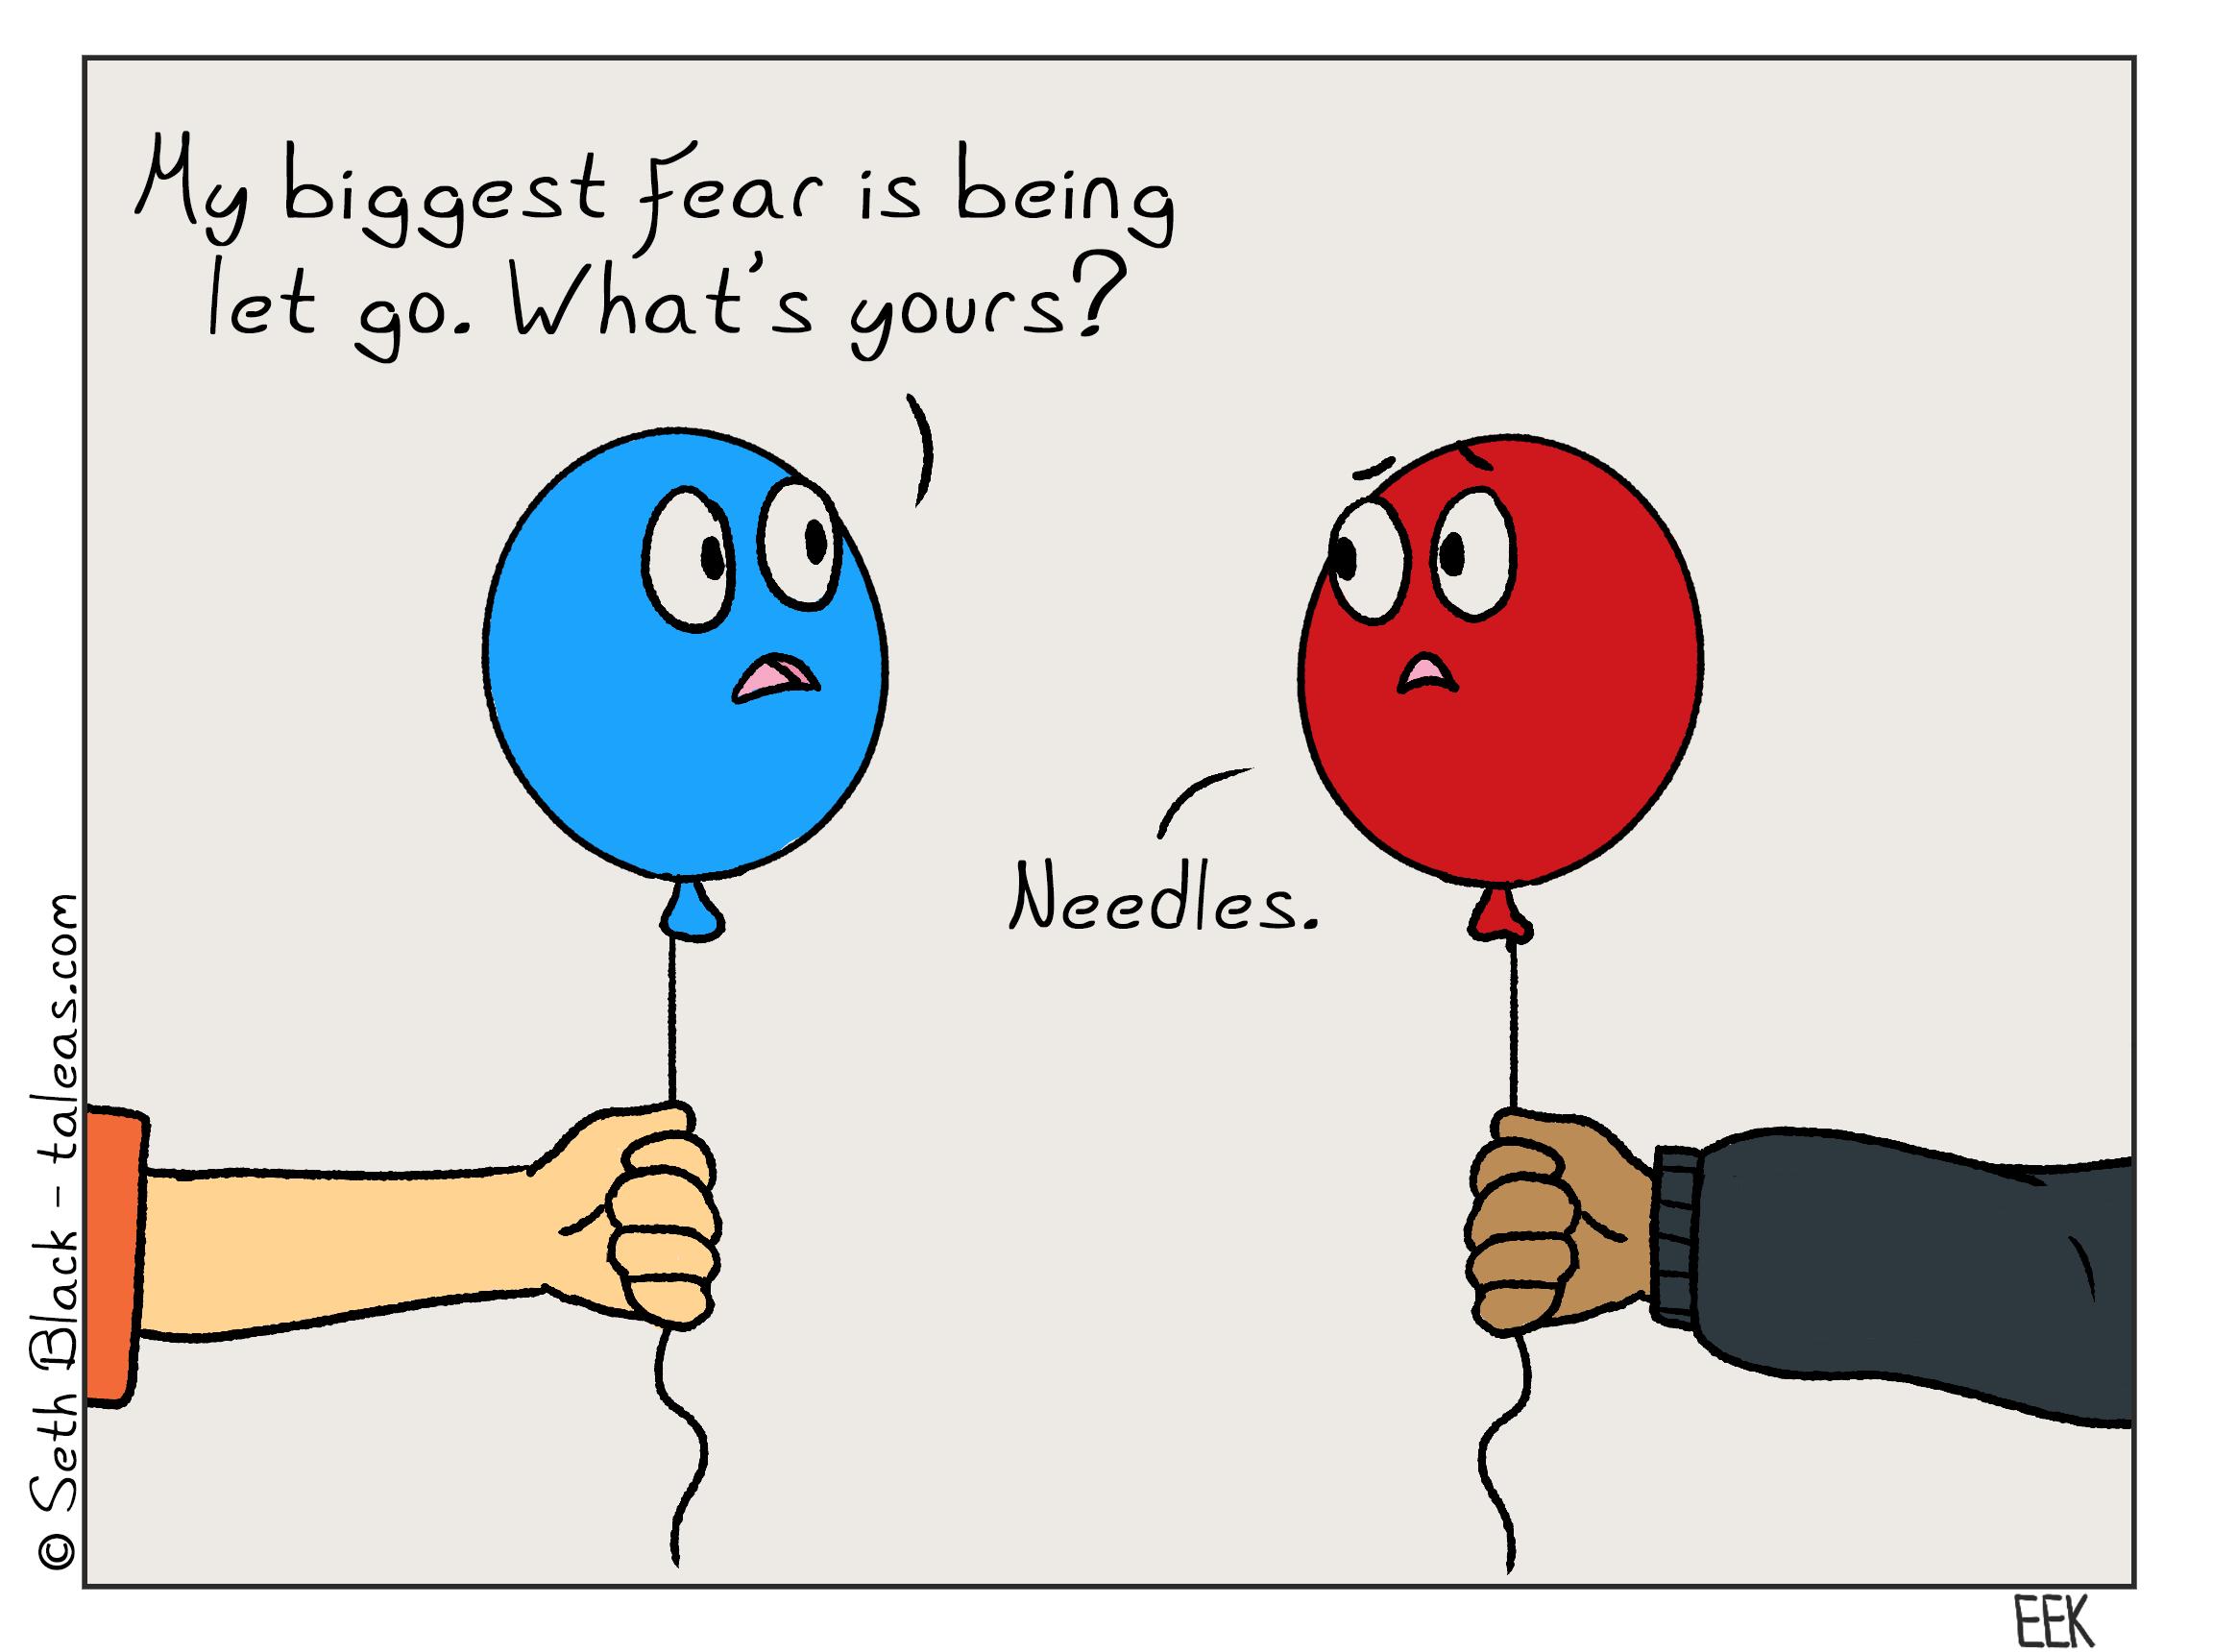 Two balloons are being held by different hands. One says, "my biggest fear is being let go, what's yours?" to which the other responds, "Needles."